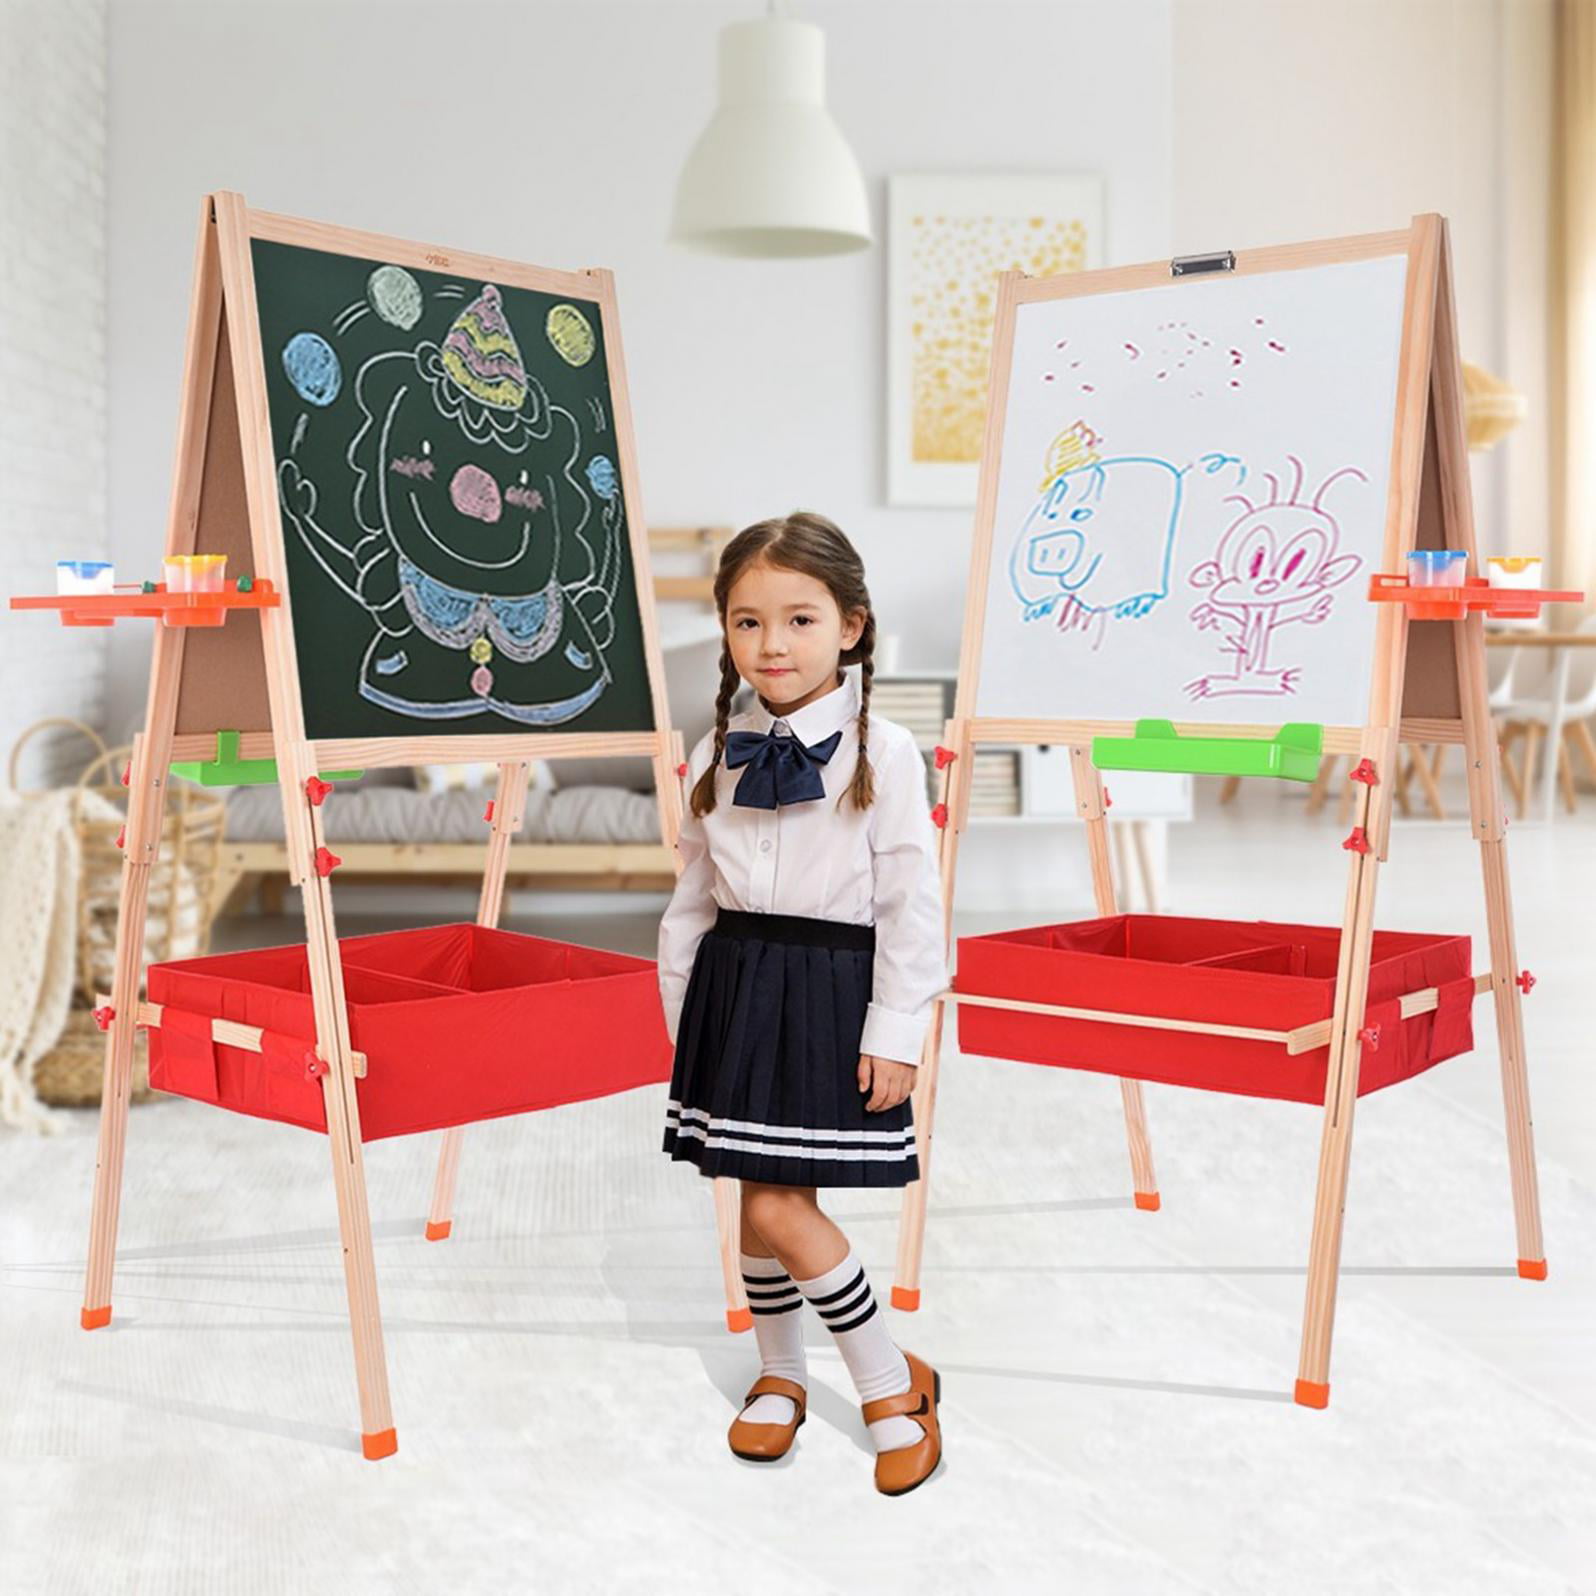 Ejoyous Kid’s Wooden Art Easel Double-Sided Wooden Children Art Easel with Magnetic Snap Eraser Set Gift*6 3 in1 Blackboard And Whiteboard for Toddlers and Kids